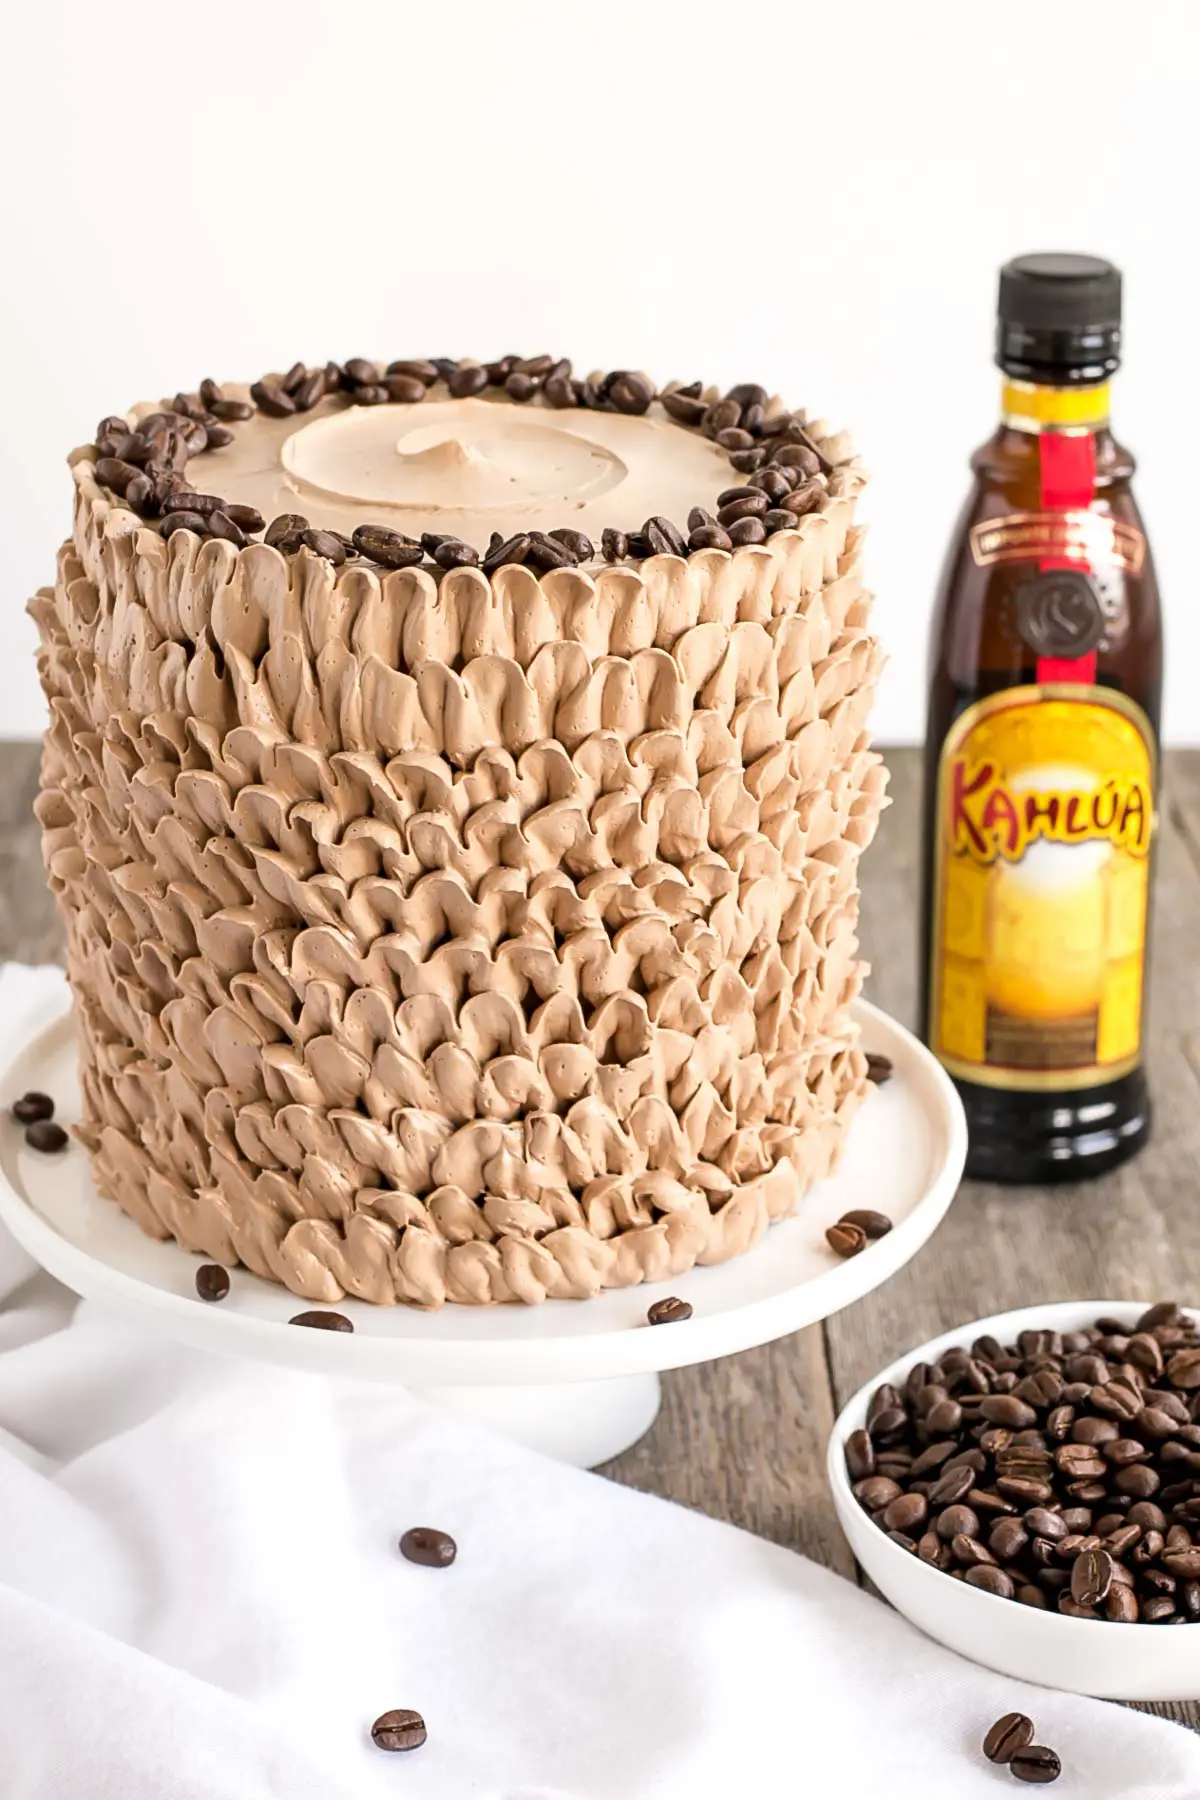 Kahlua cake with buttercream ruffles and coffee beans on top.